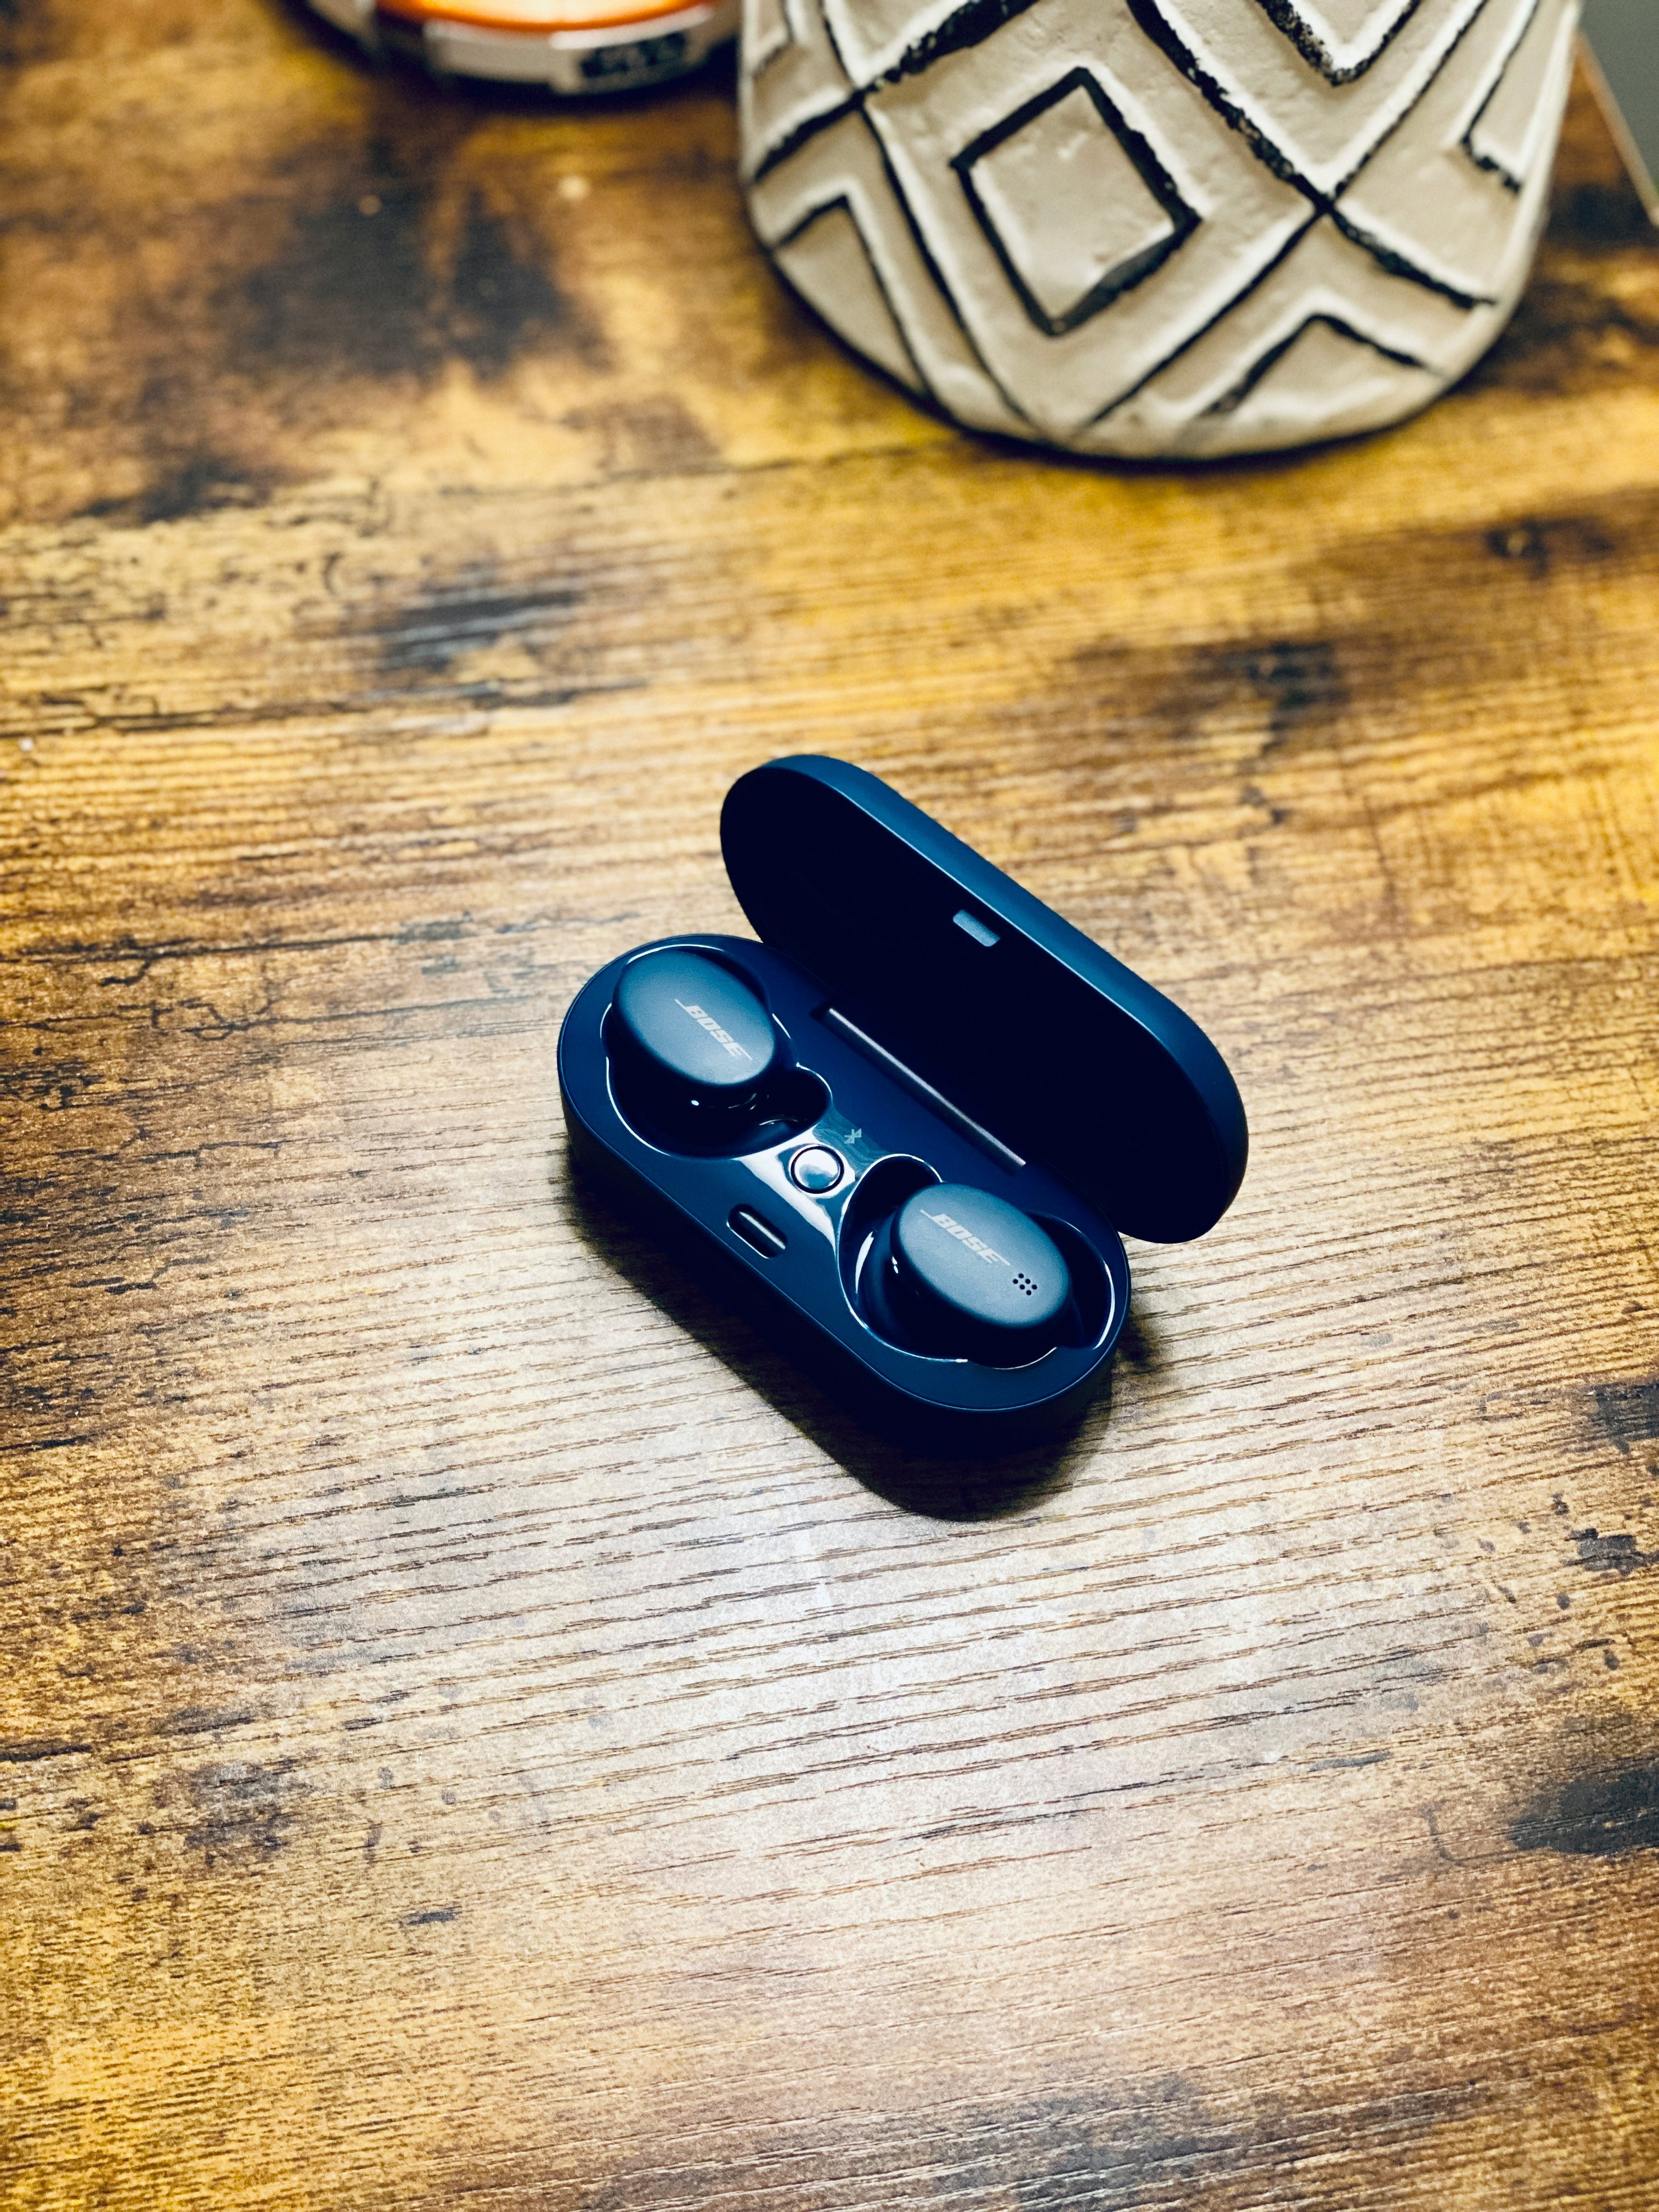 Why Bose's Sport Earbuds are my new go-to running headphones